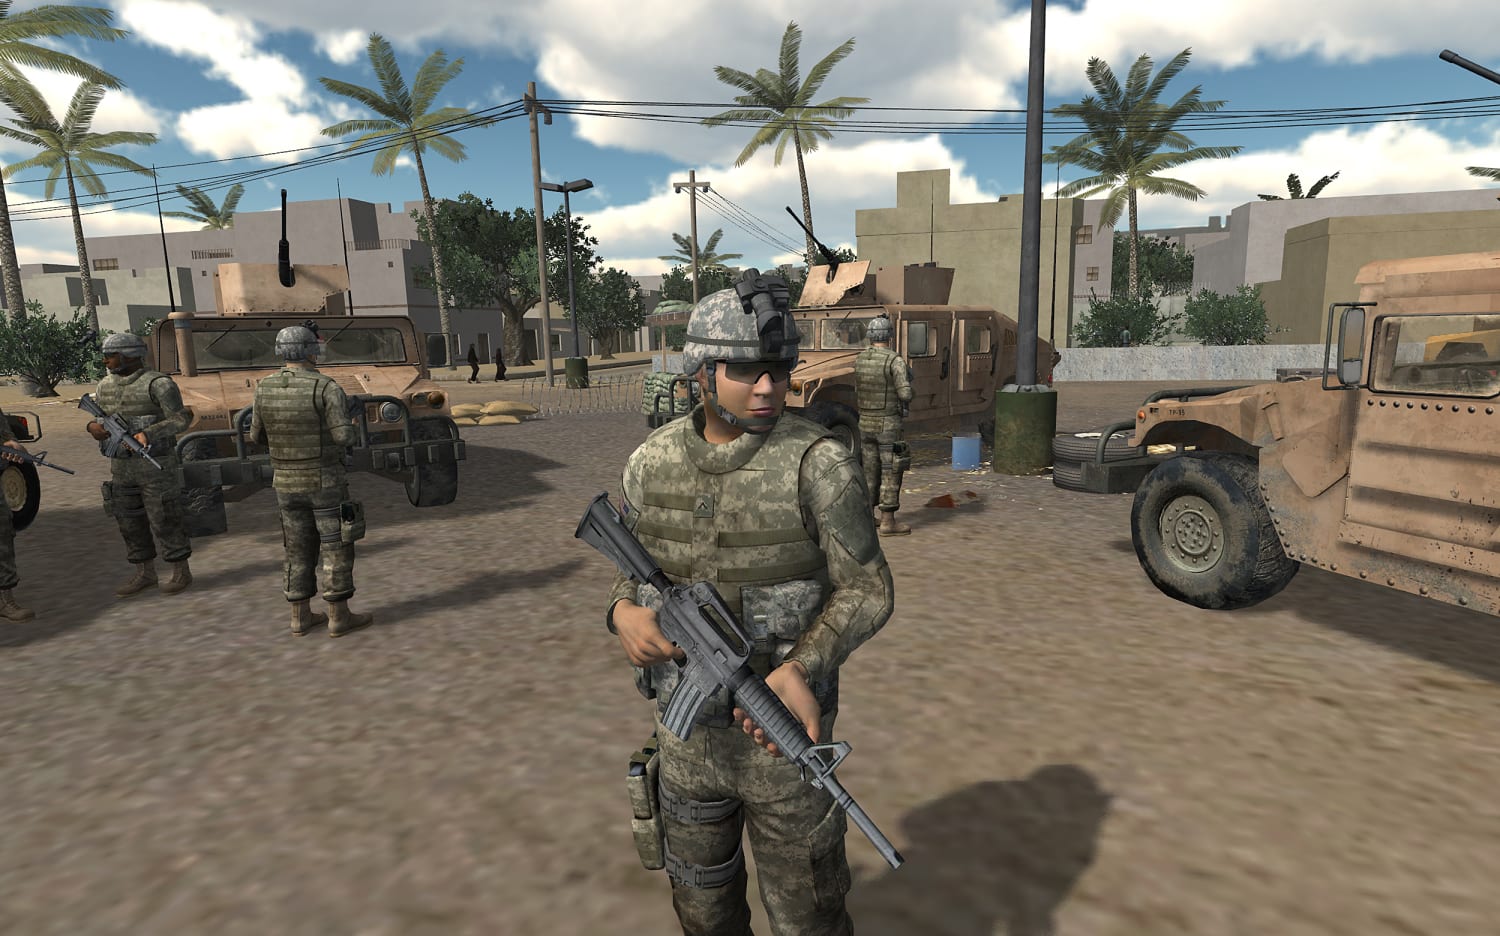 Virtual Reality Is Helping Heal Soldiers With